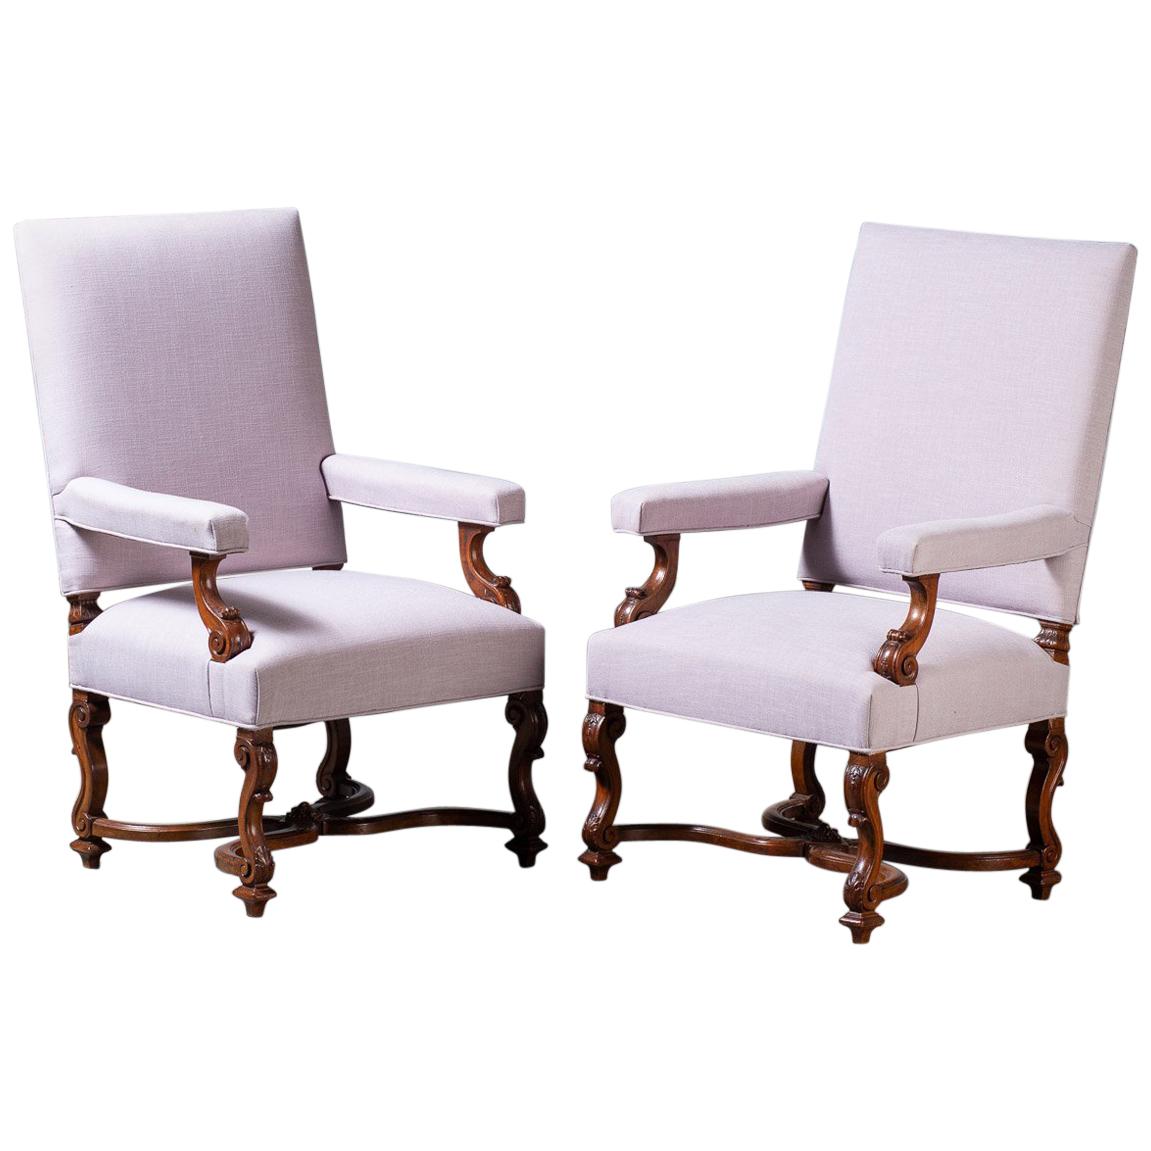 Pair of Antique French Louis XIV Régence Walnut Chairs, circa 1875 For Sale